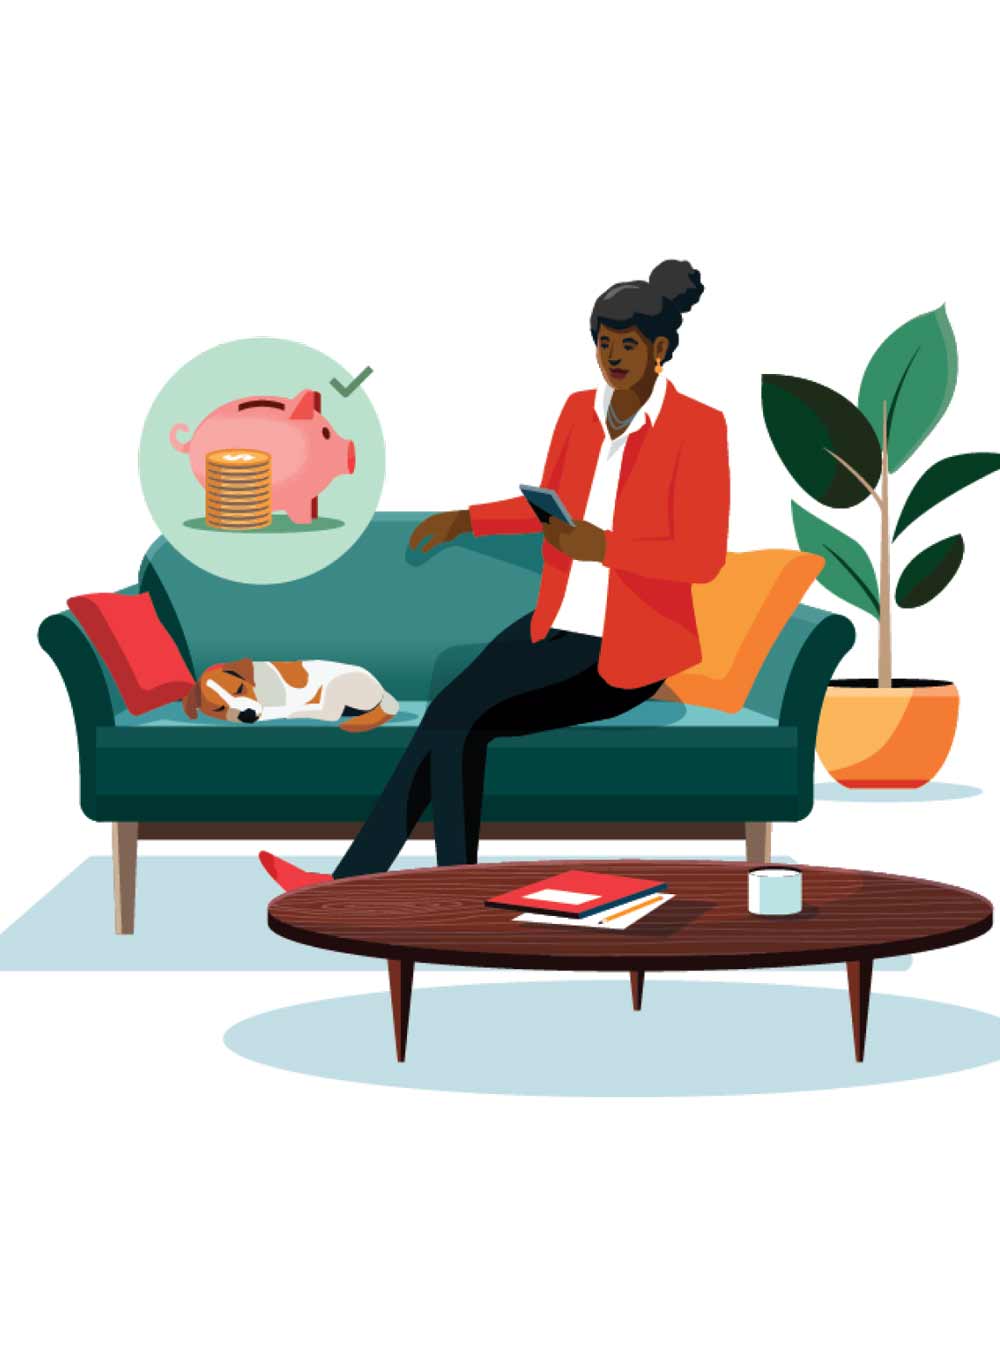 A woman sitting on a couch with a dog, showcasing the concept of budgeting and saving money